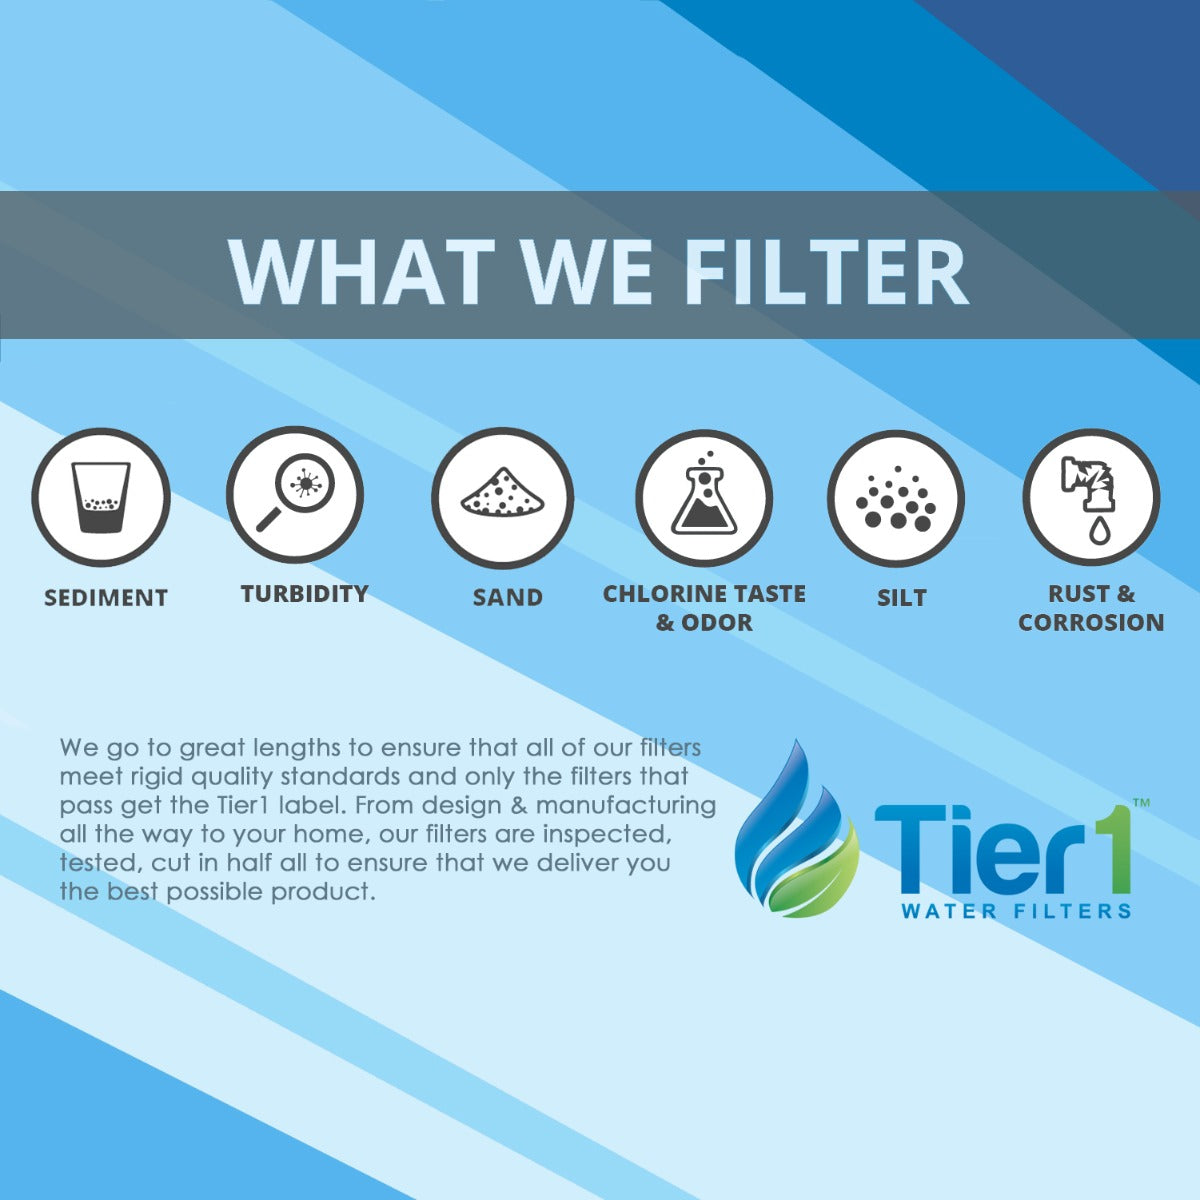 Tier1 Inline Filter comparable for the GE GXRLQR